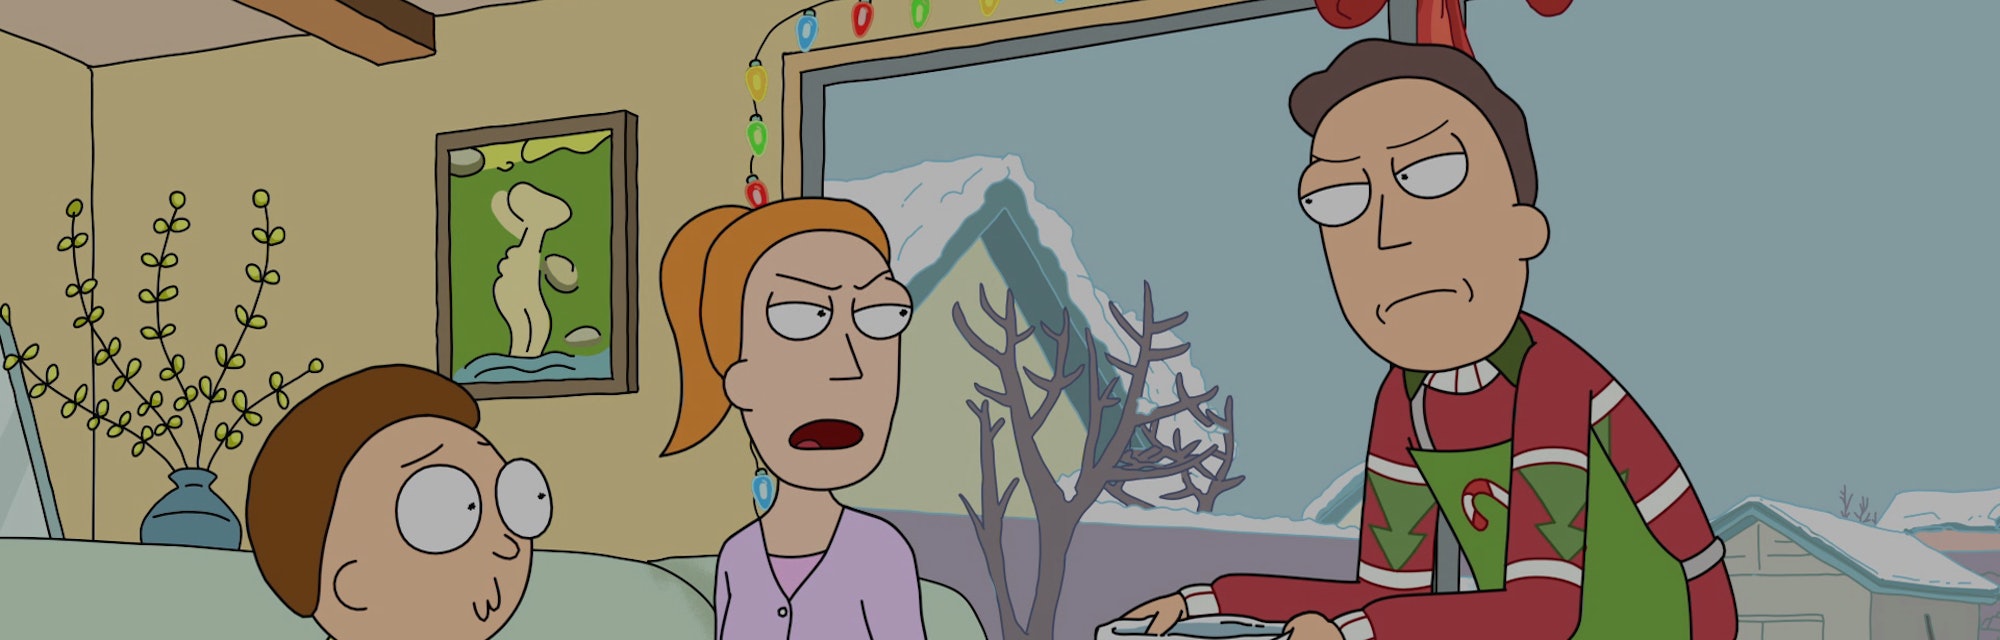 Download Rick And Morty Season 4 Christmas Episode Teased At San Diego Comic Con SVG Cut Files